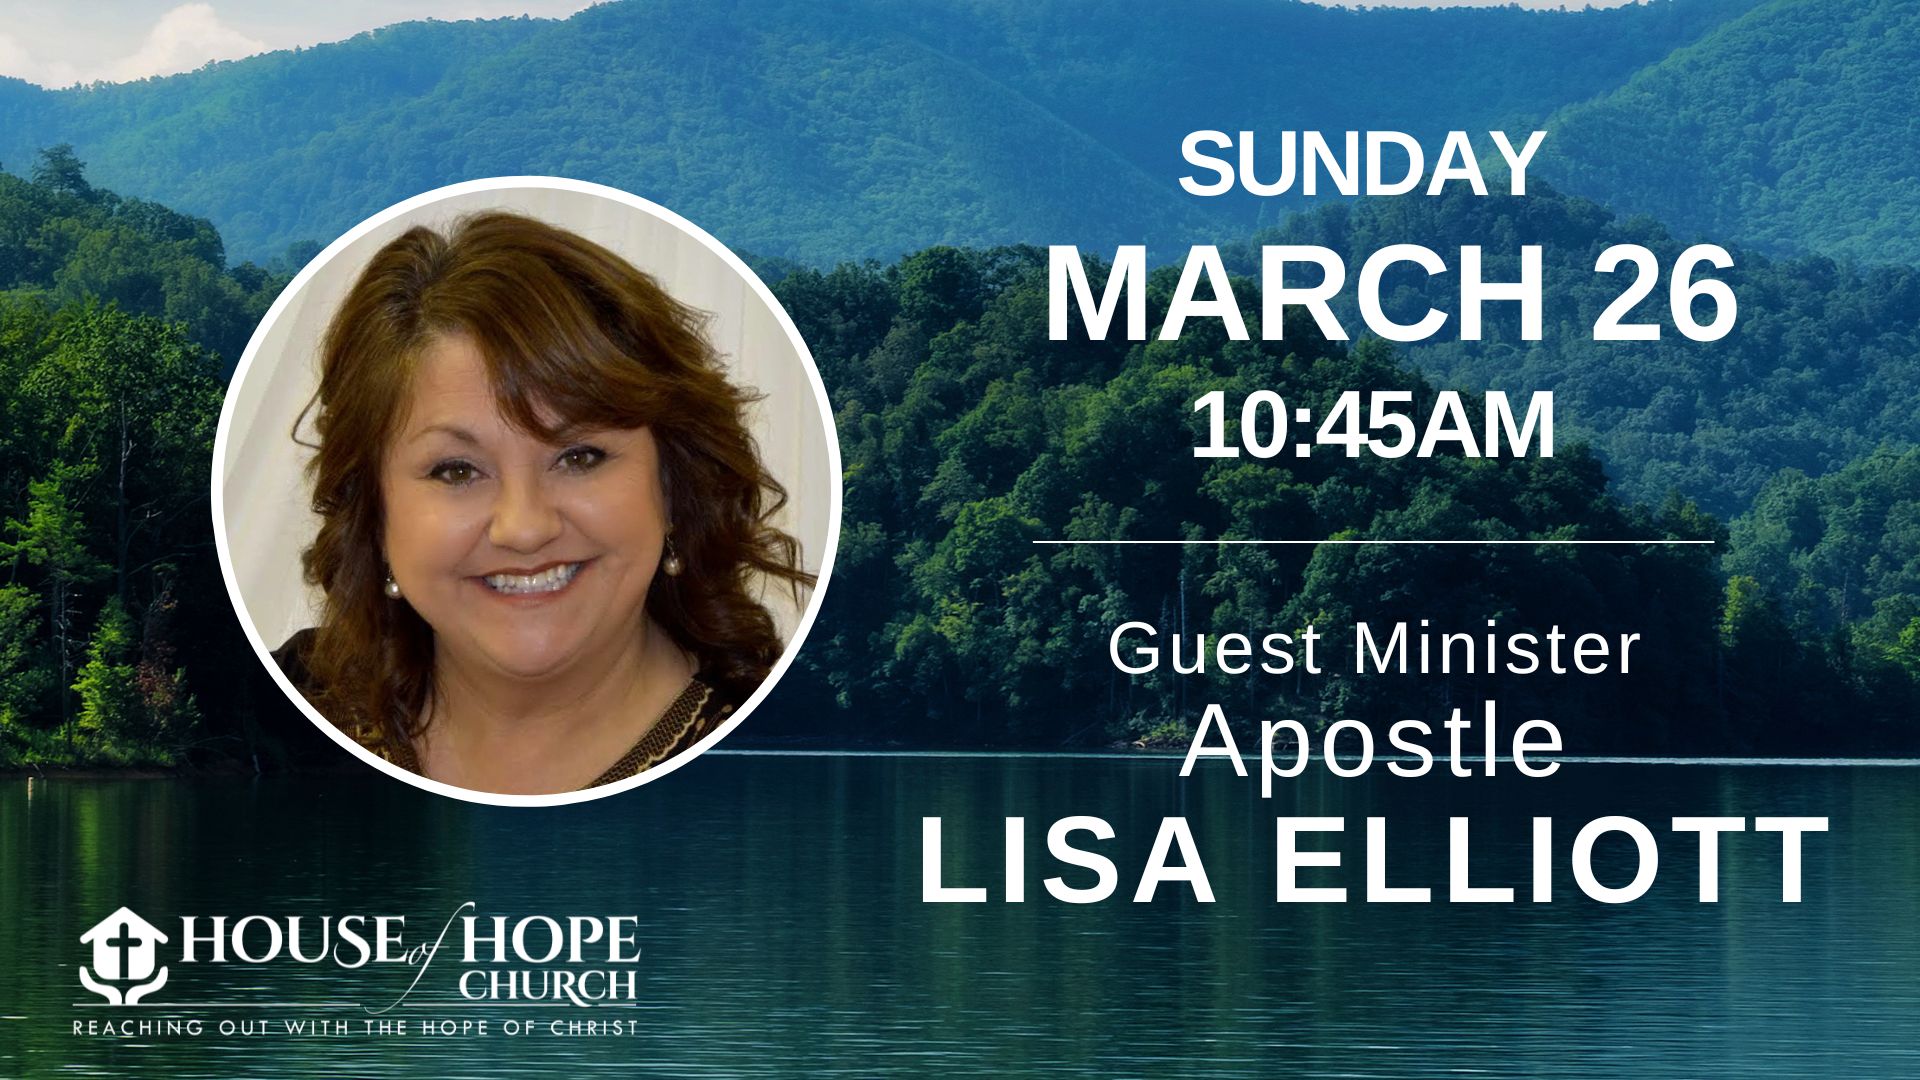 THIS IS WHAT THE LORD SAYS: PUT YOUR HOUSE IN ORDER WITH APOSTLE LISA ELLIOTT